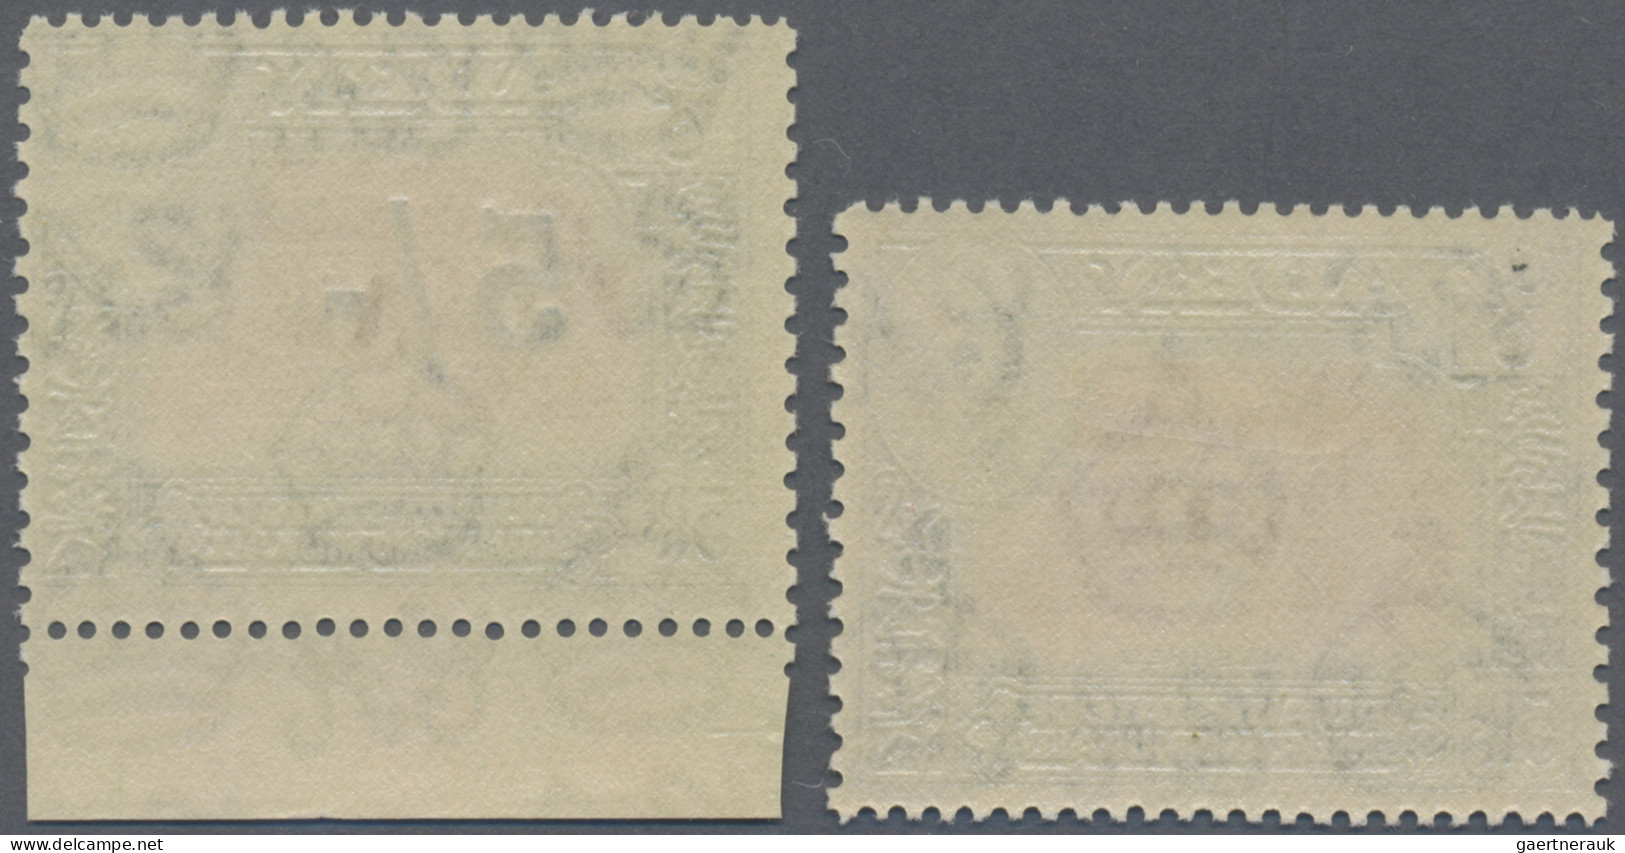 Aden - Qu'aiti State In Hadhramaut: 1942/1951 Variety "EXTRA WALL" On 1942 5r. A - Yemen